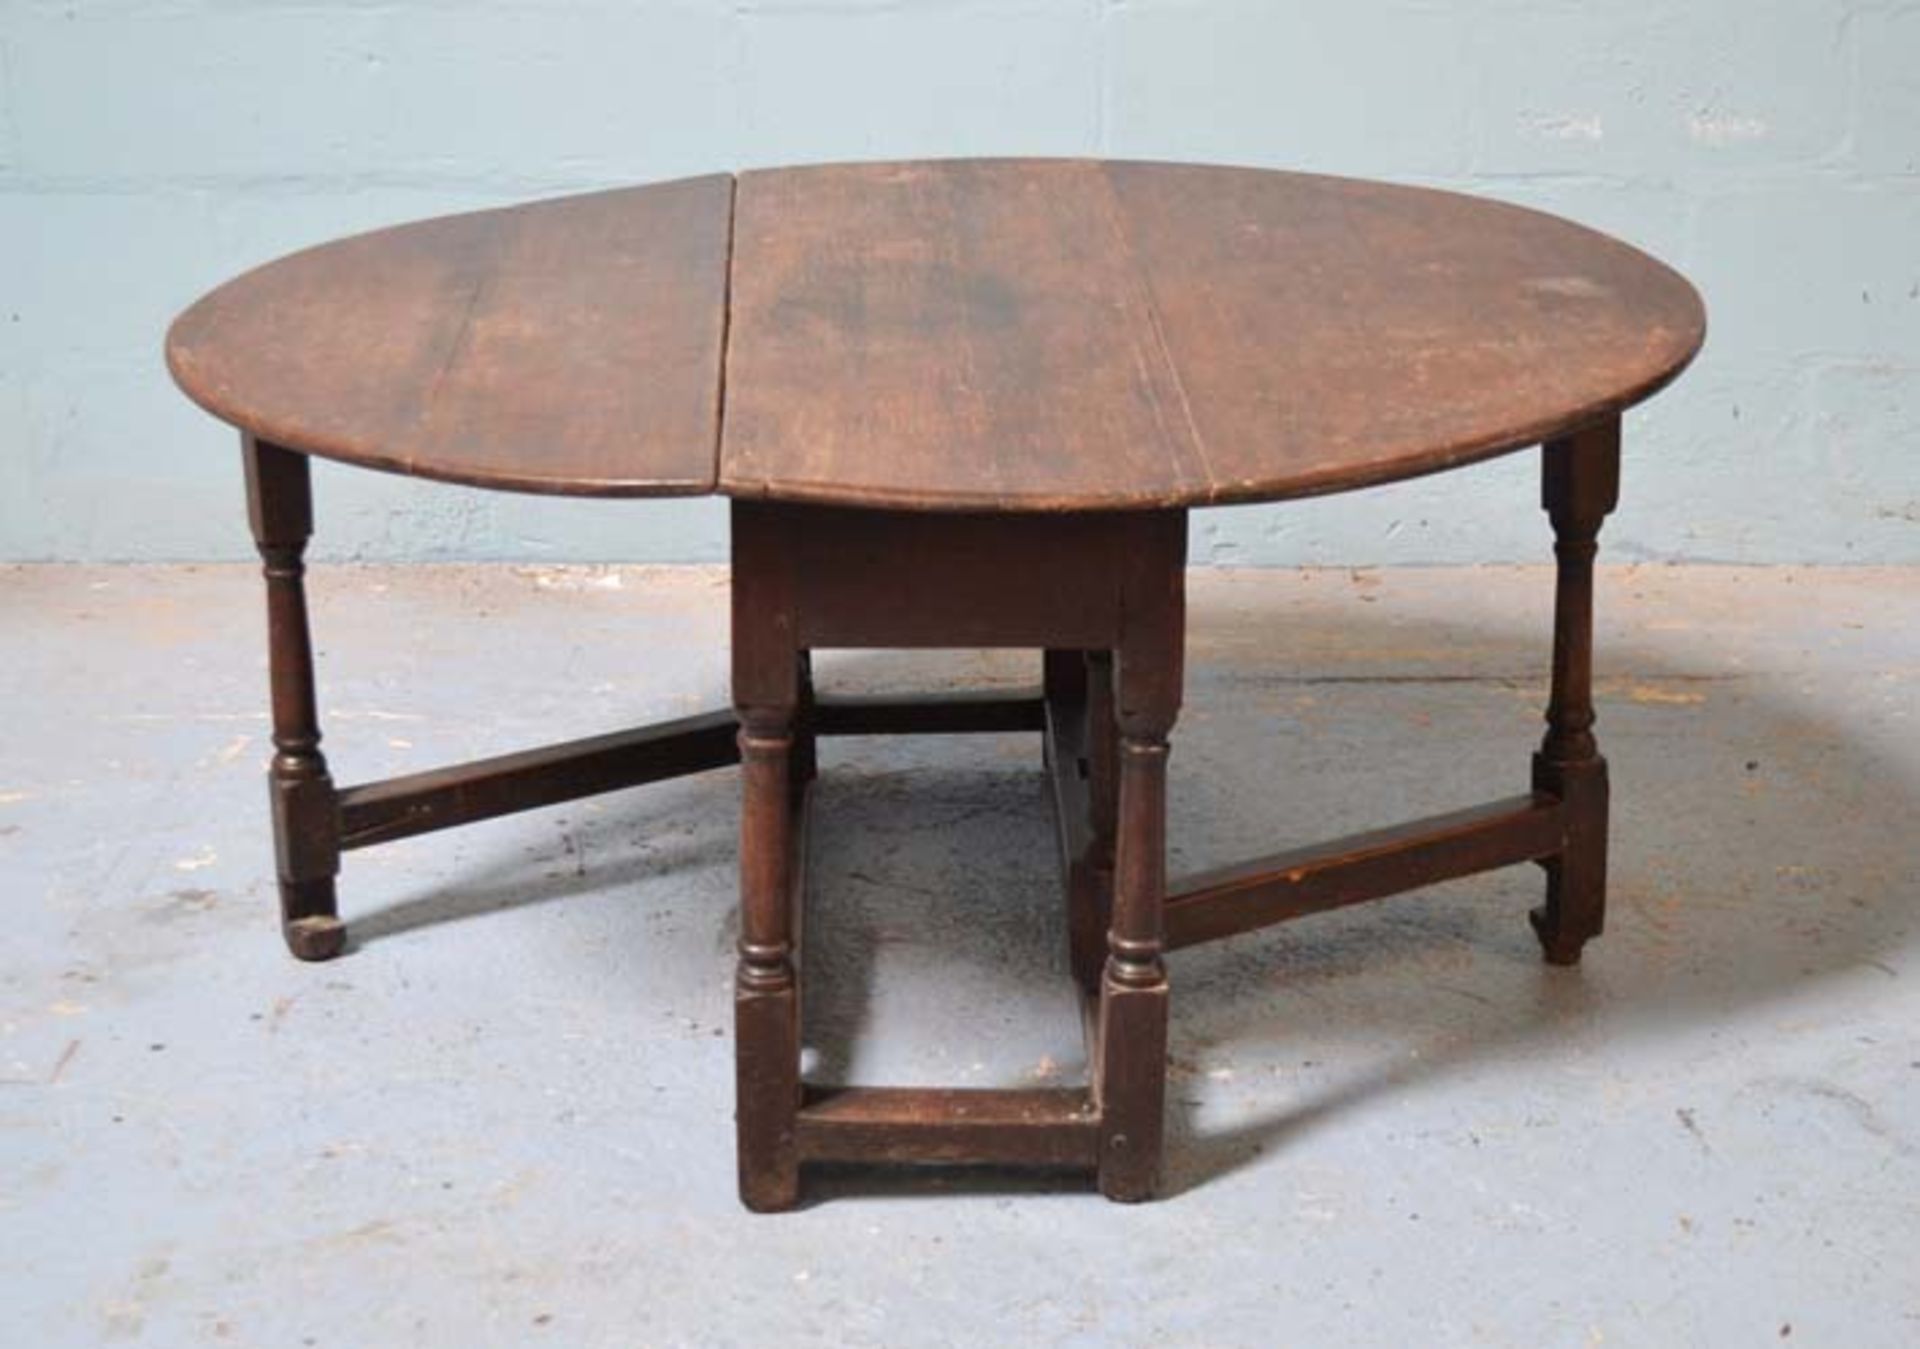 *ANTIQUE OAK ROUND DROP DOWN TABLE, CIRCA 1800. 1420MM ( 56" ) WIDE X 1205MM ( 47.5" ) DEEP X - Image 3 of 4